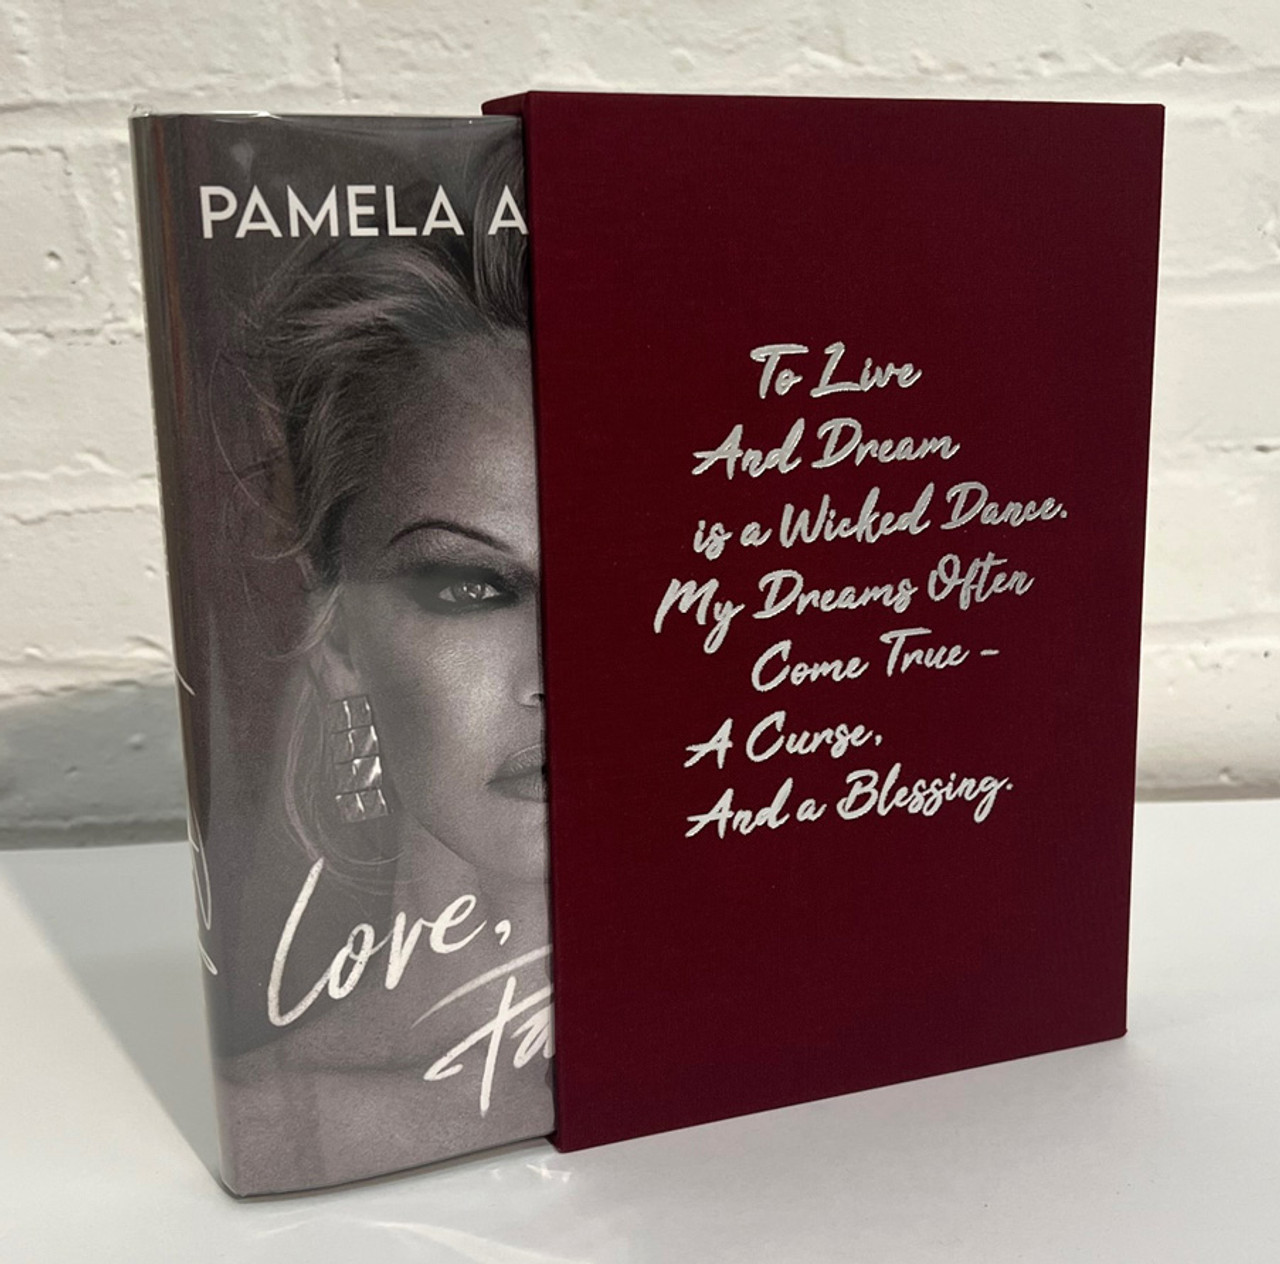 Pamela Anderson "Love, Pamela" Signed First Edition, Limited Slipcased Collector's Edition of 60 w/COA [Sealed]